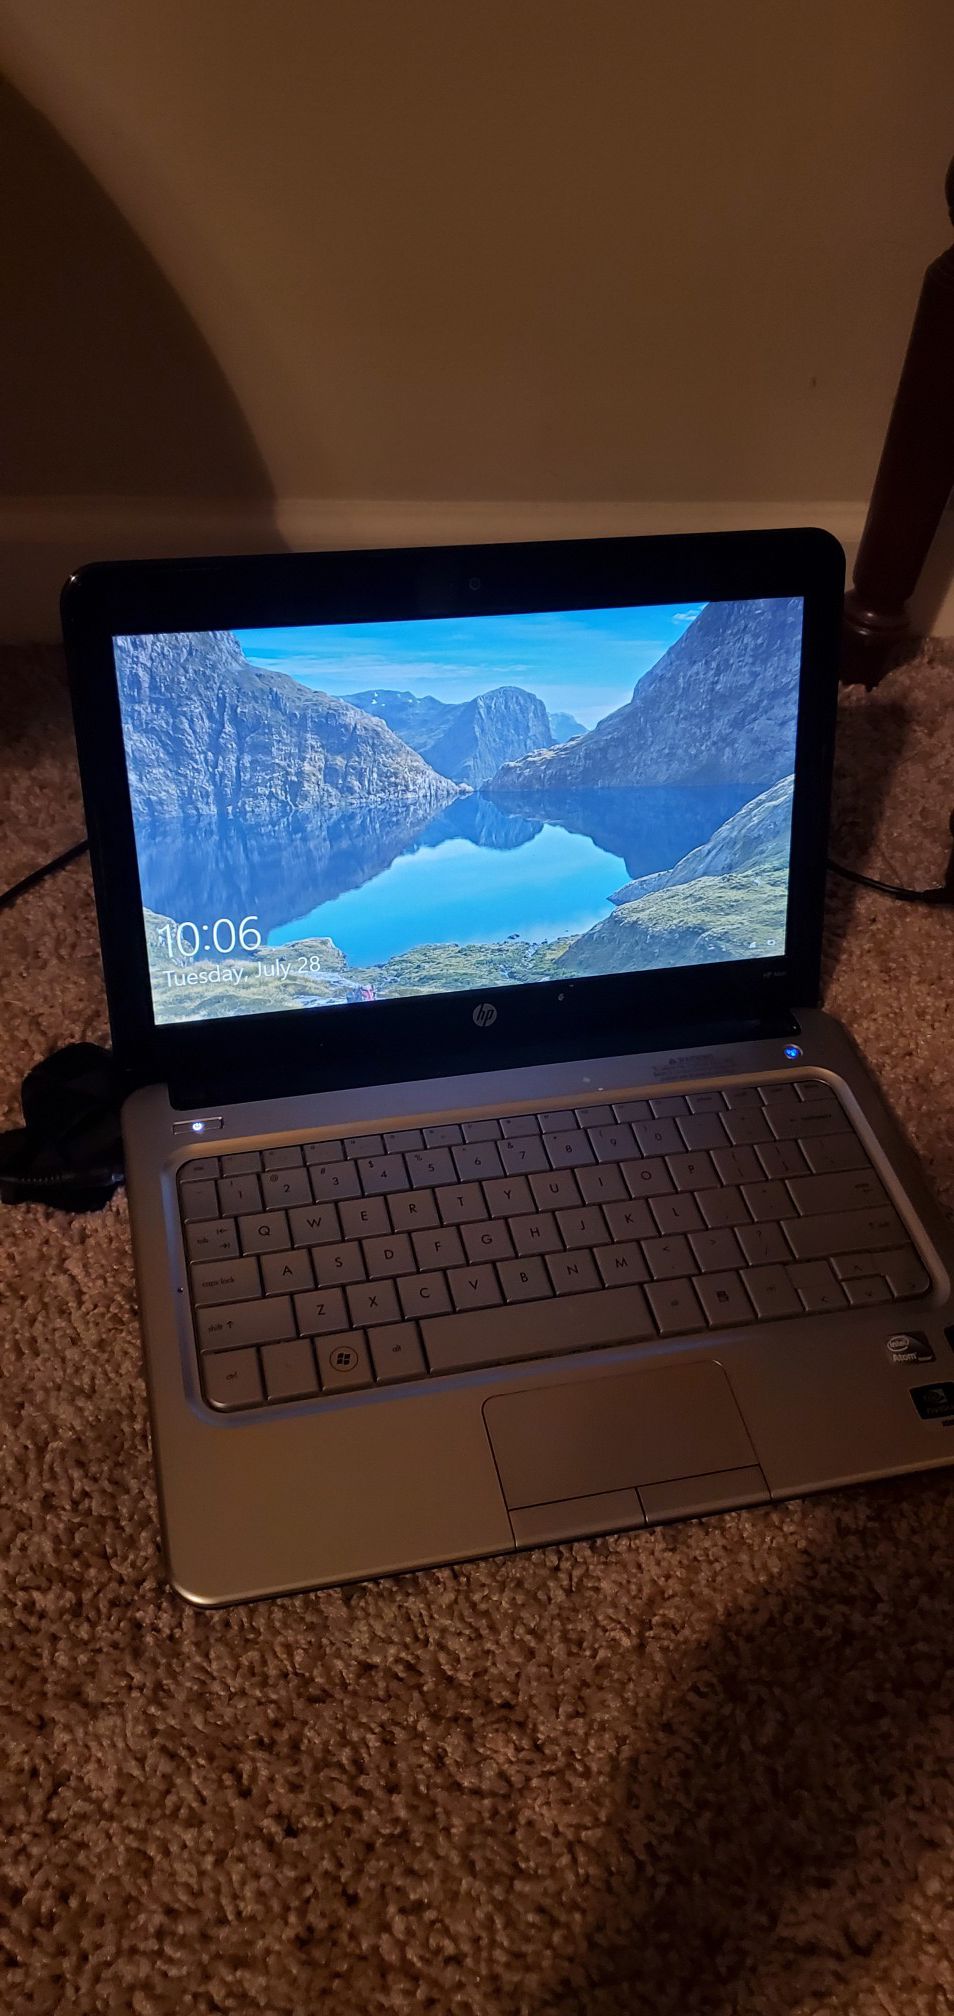 HP Mini Laptop - 11.5 screen/ Standard Programs - Works perfectly while plugged in. Price is firm.